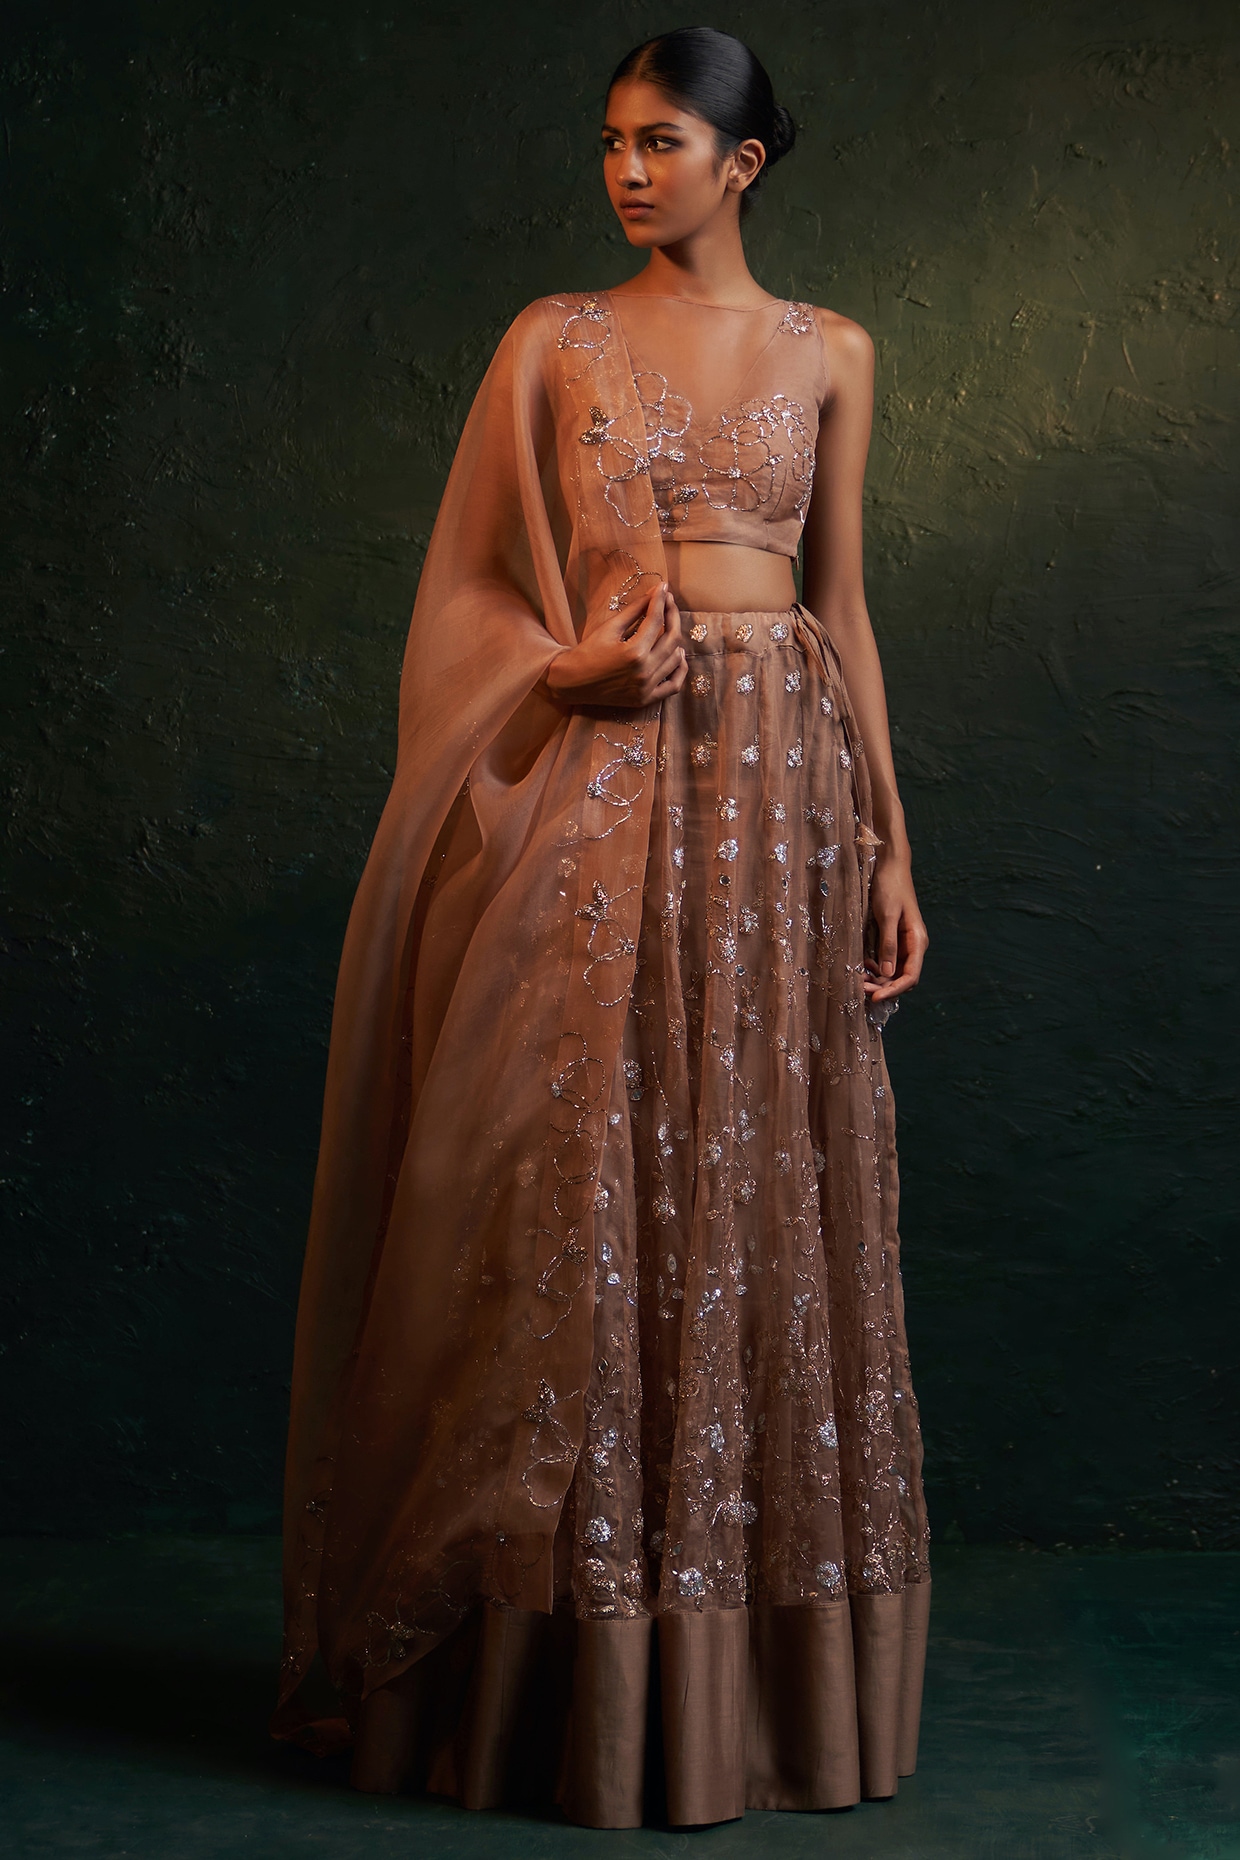 Lucknowi Andaaz™ by Supreet | Ruhani Nude shade Lehenga set with Allover  Chikankari, pearl & sequins embellishements. Available exclusively on  www.lucknowiandaaz.in ... | Instagram